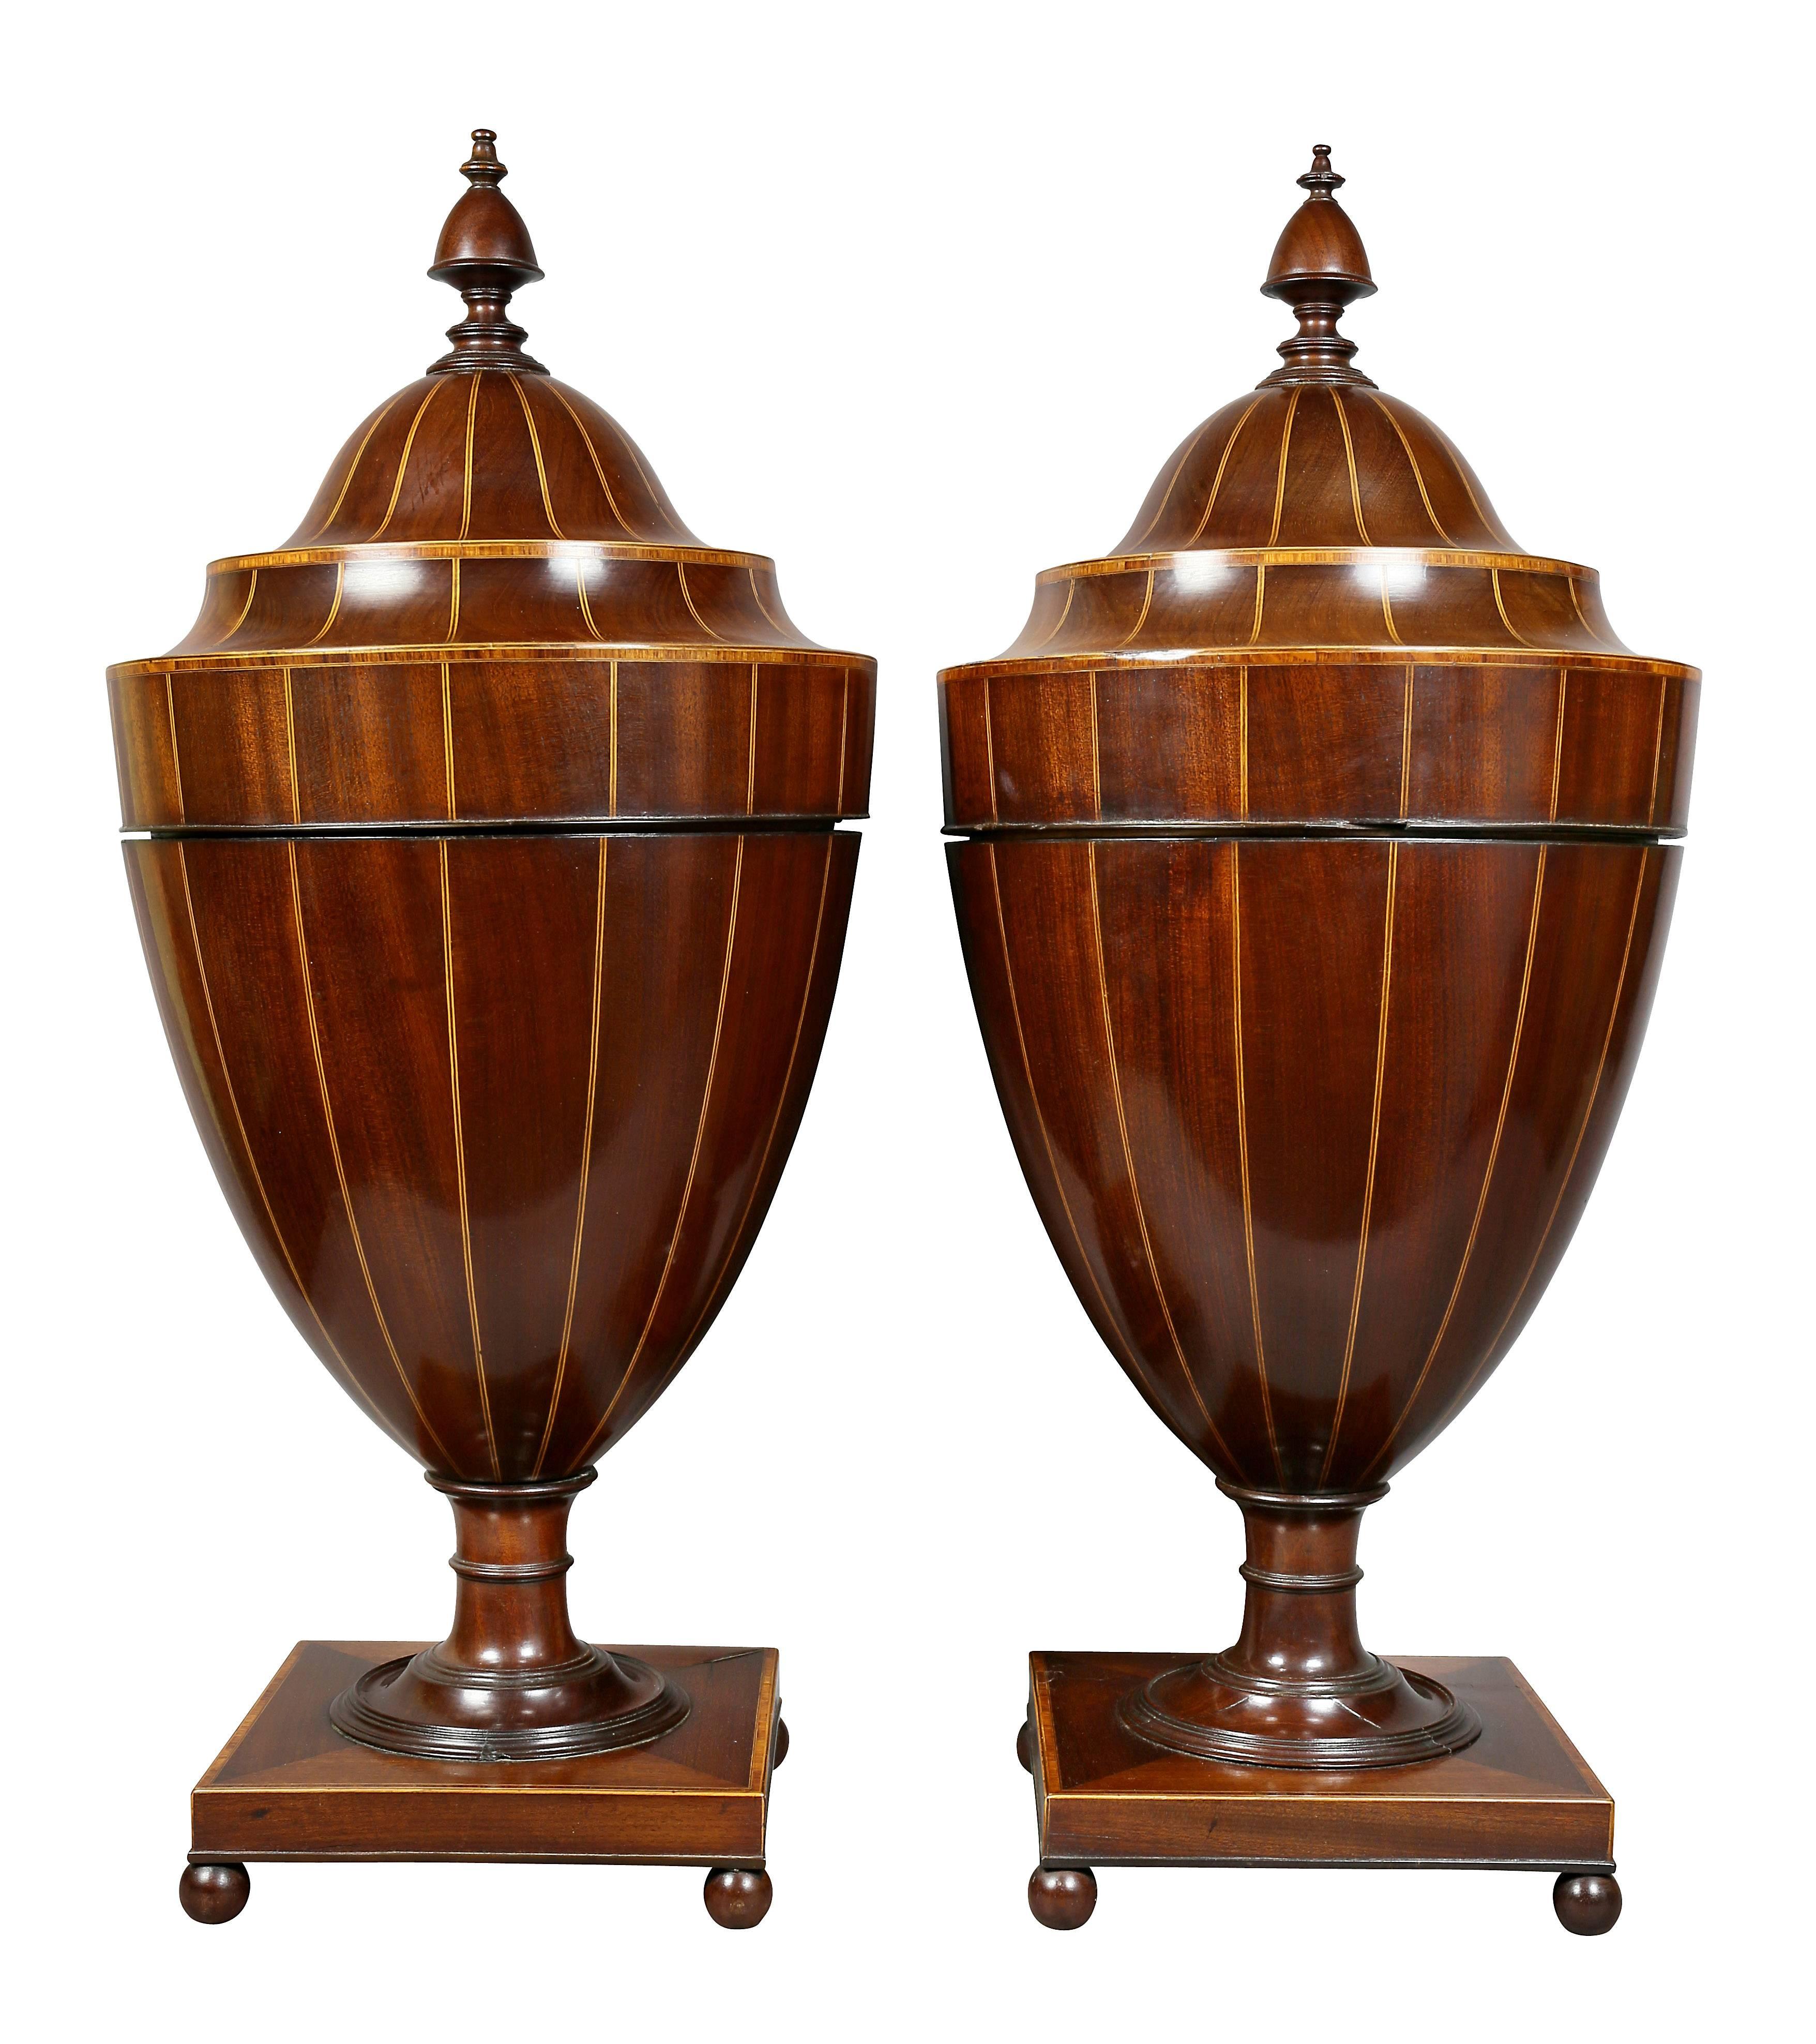 Pair of Regency Mahogany and Inlaid Cutlery Urns 8